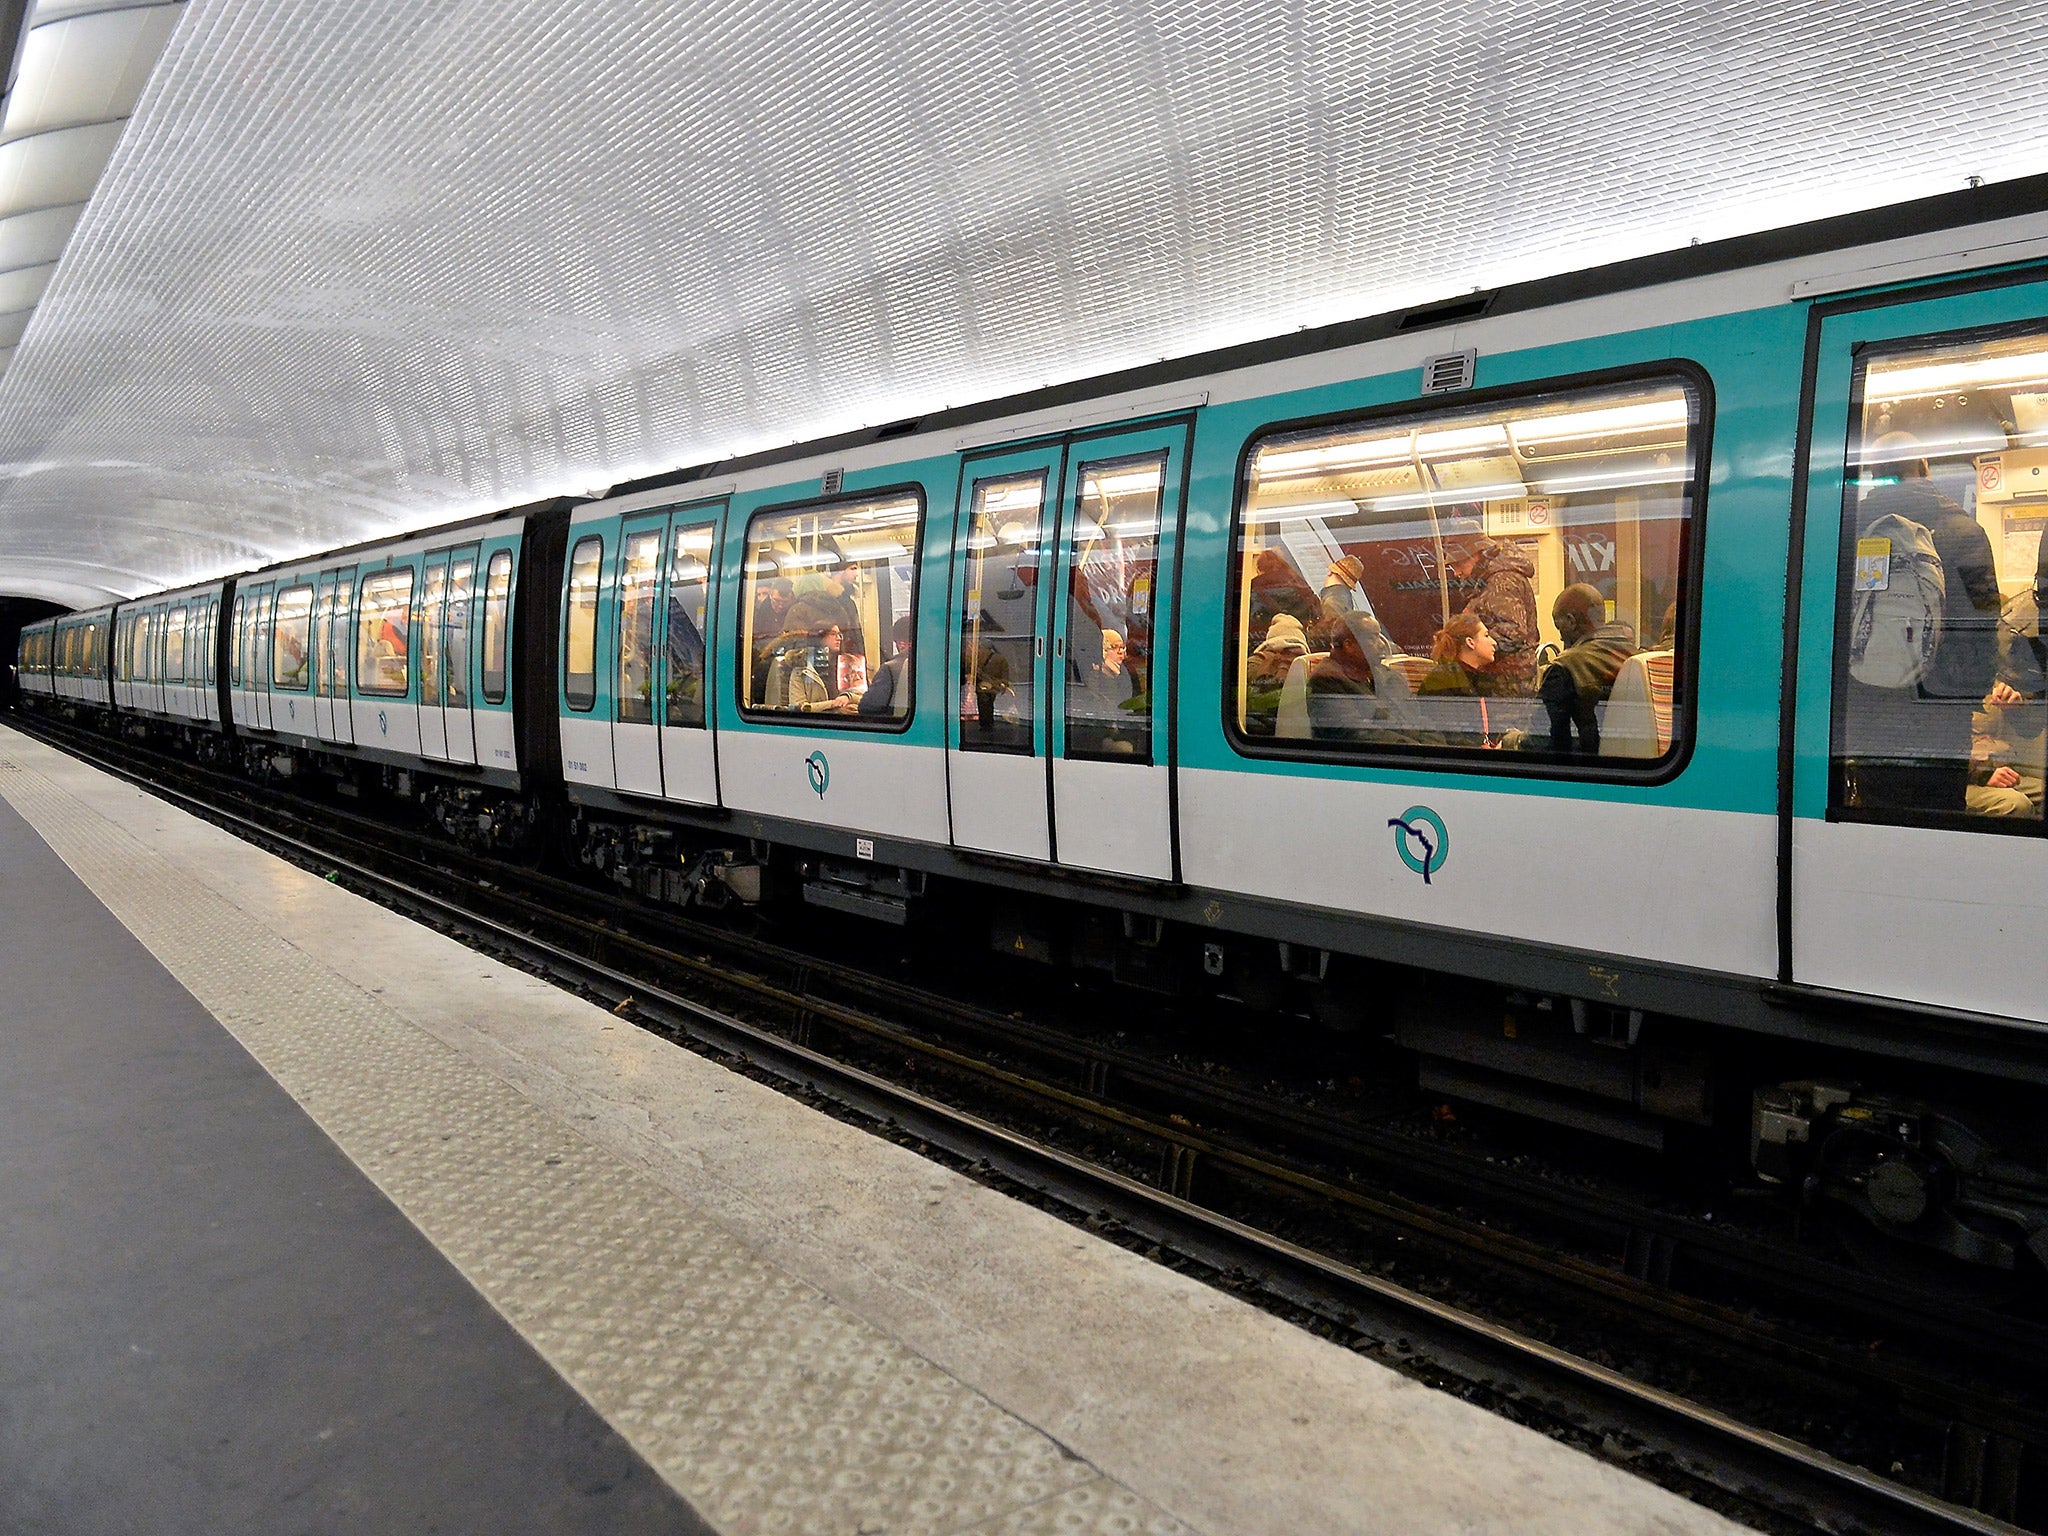 Paris Métro's original decision led to a backlash from religious and secular figures alike (Getty)